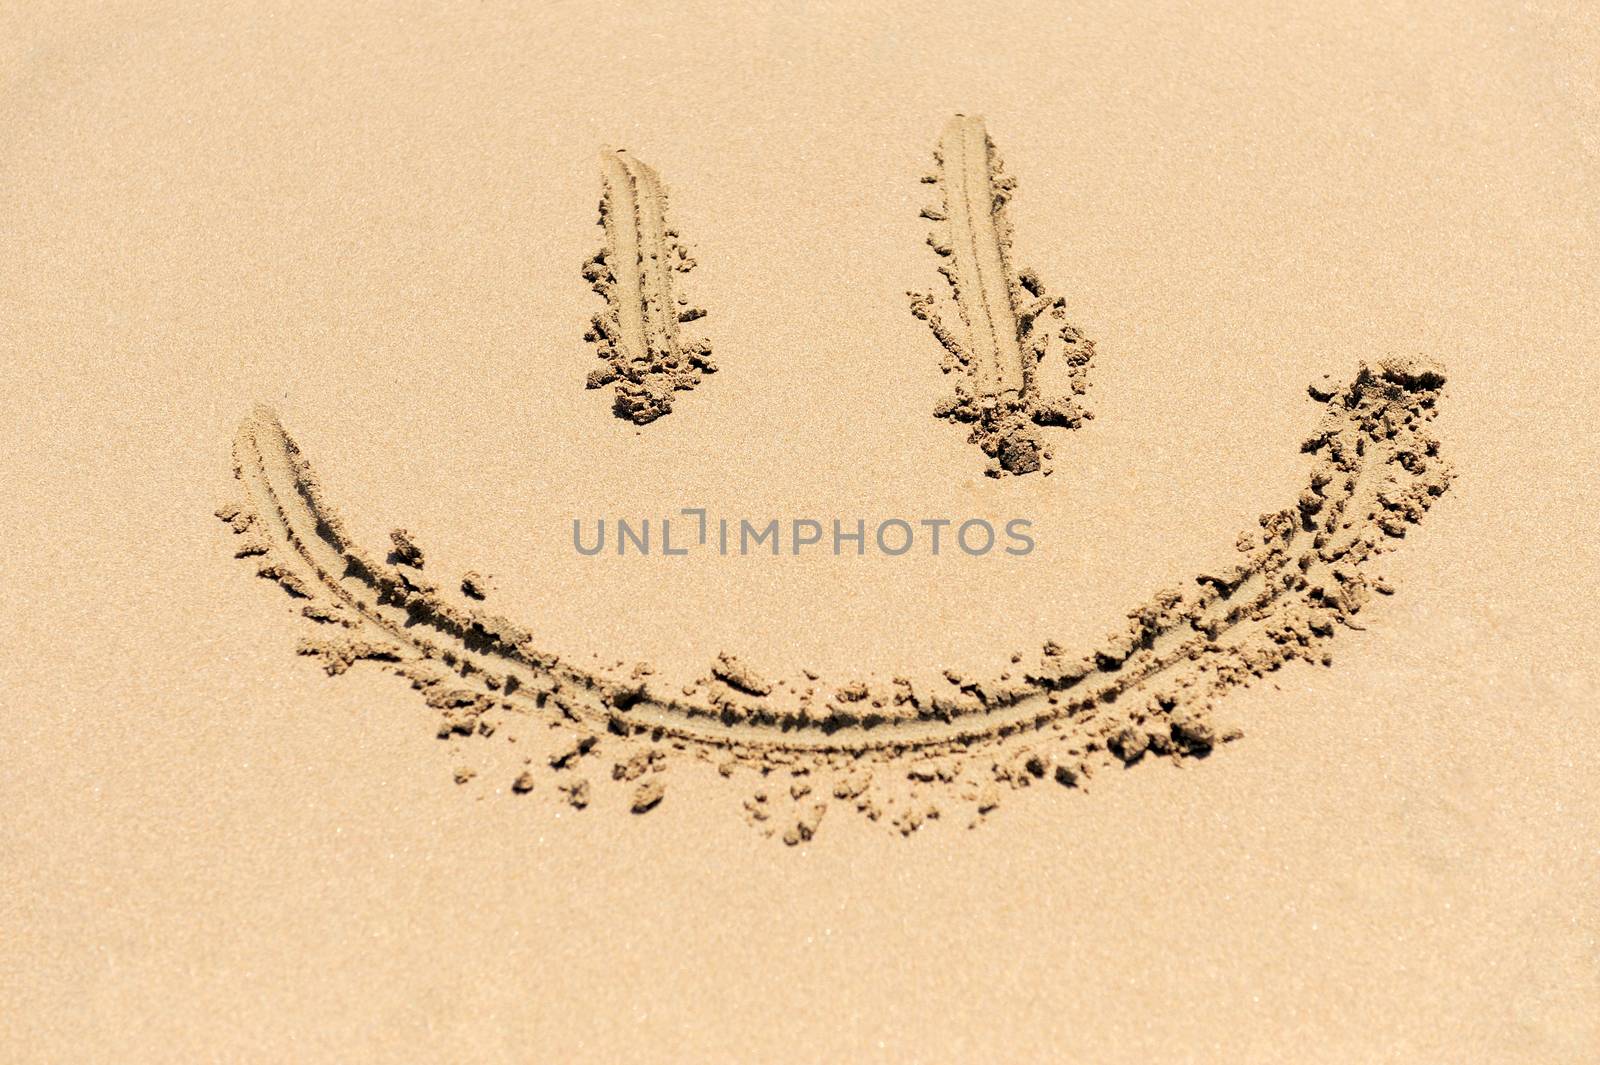 A smiley face drawing on a sand